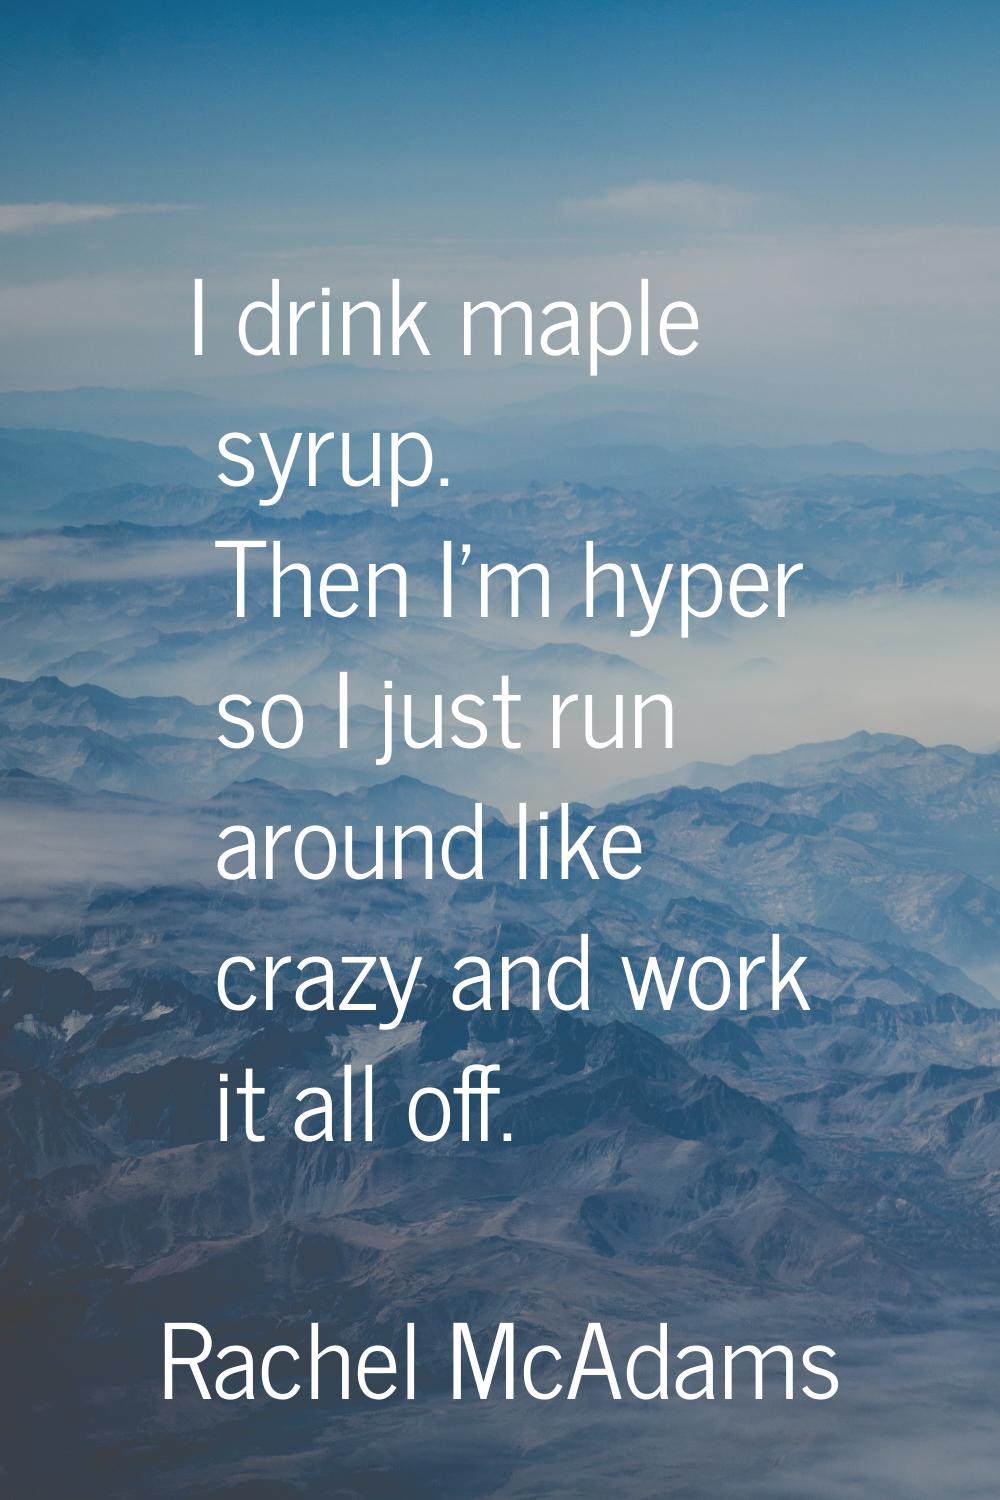 I drink maple syrup. Then I'm hyper so I just run around like crazy and work it all off.